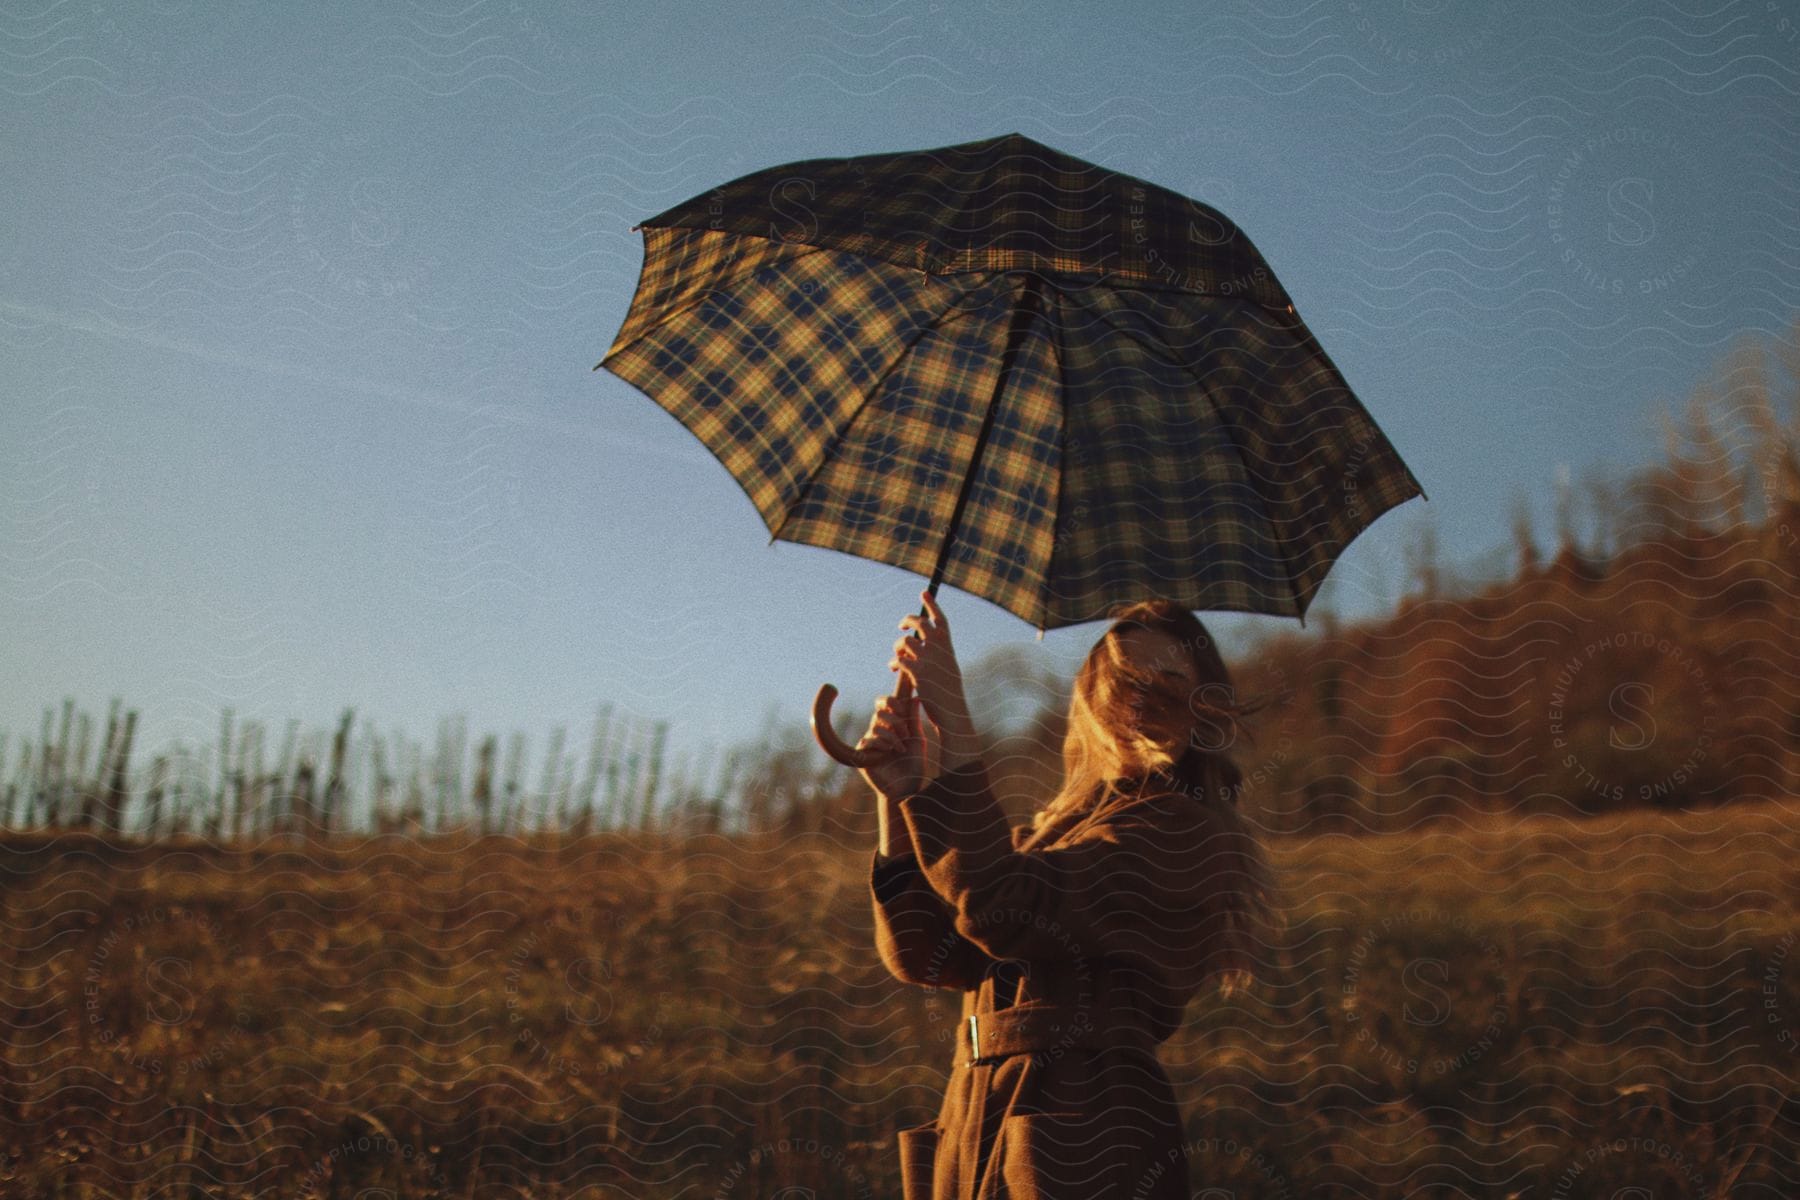 The sun shines upon a woman standing in a rural field holding an umbrella